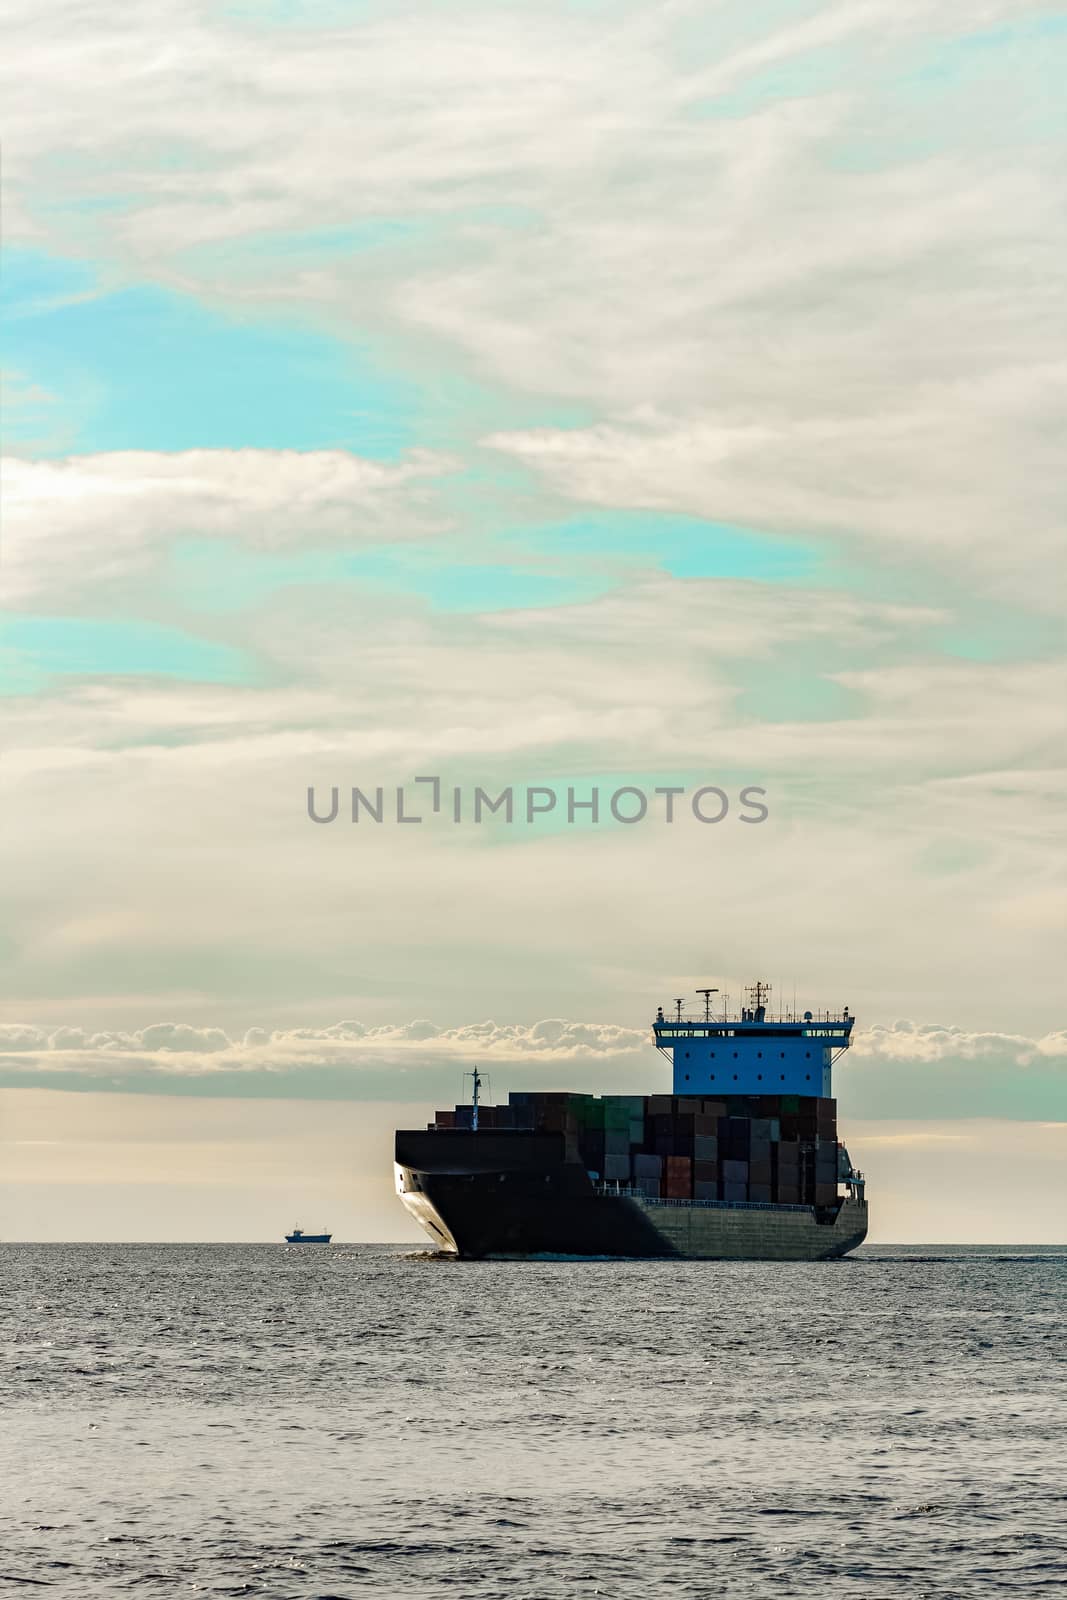 Black container ship underway by sengnsp